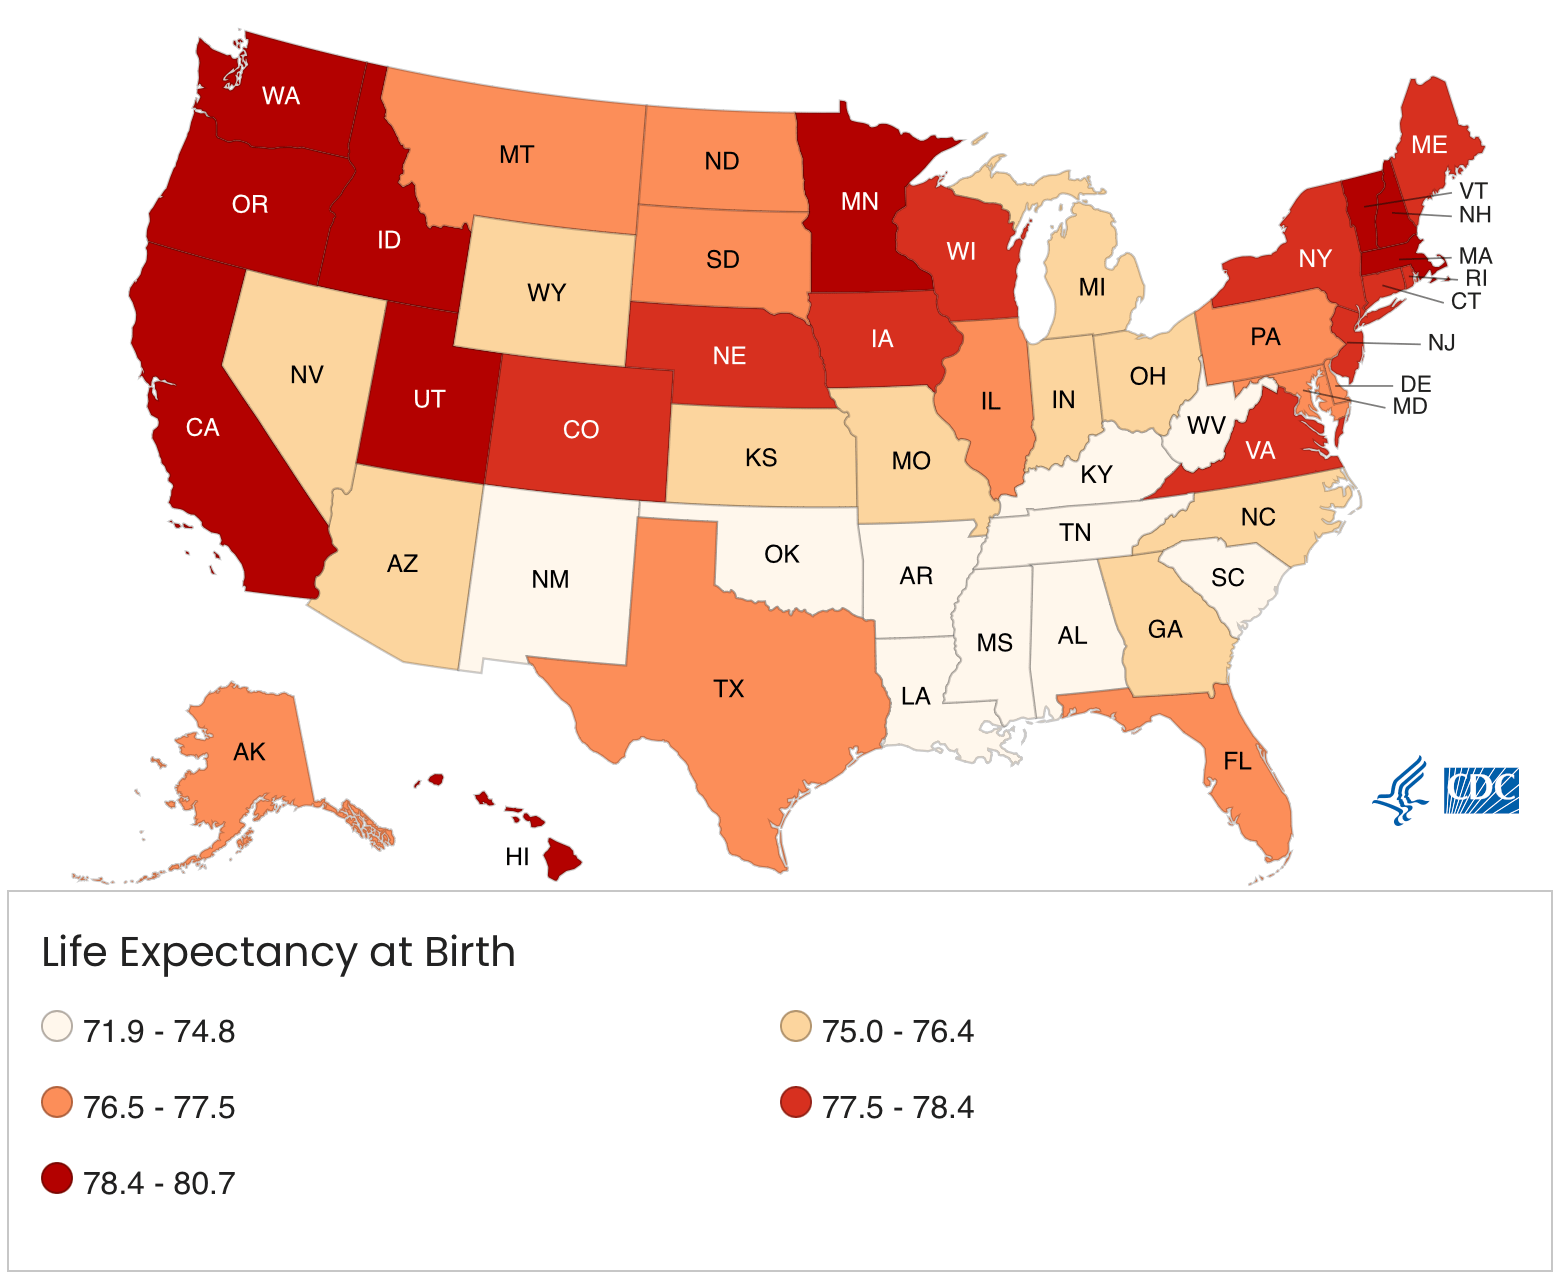 Life expectancy by state in America according to the CDC - Hawaii is the state with the longest life expectancy